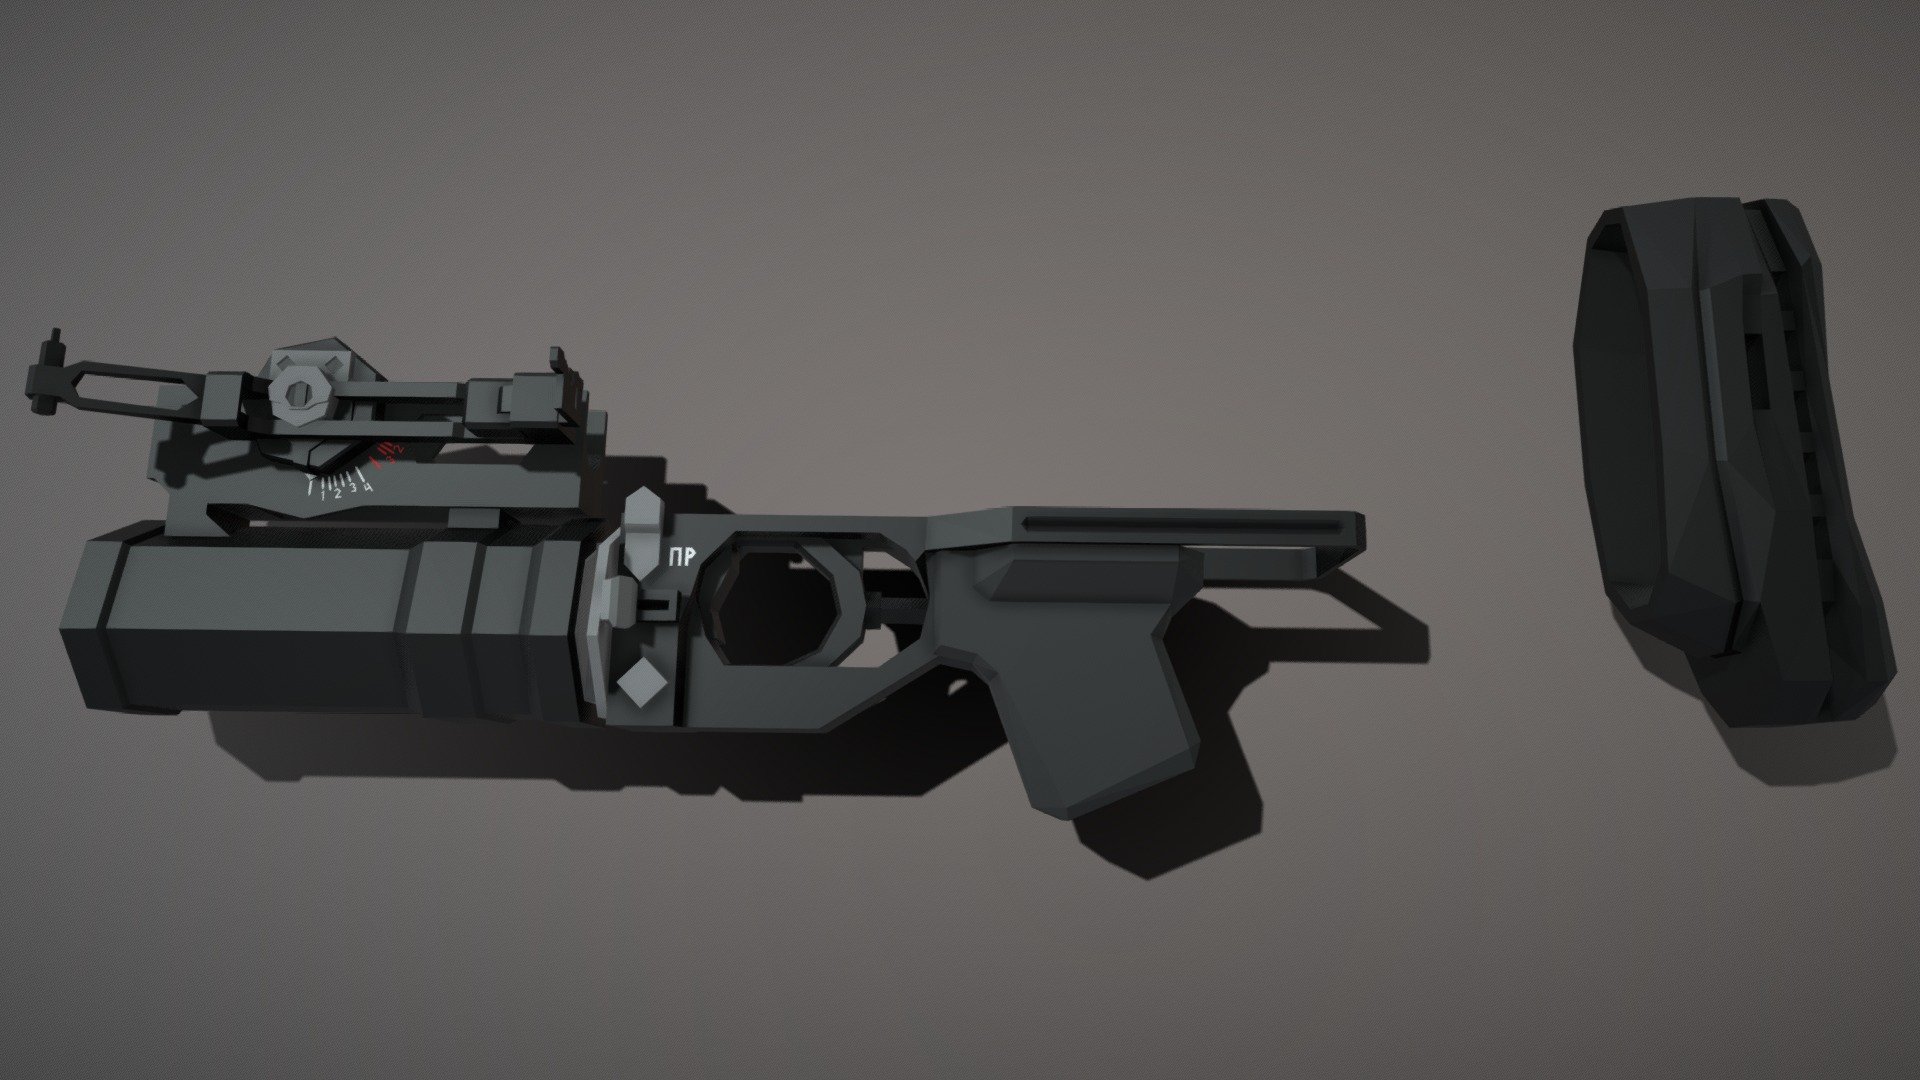 Low-Poly model of the GP-25 grenade launcher, made to attach onto the underside of the barrel of pretty much any standard AK rifle.

includes a buttpad for attaching onto the stock of host rifle, reduces felt recoil of the grenade launcher in particular, but also the rifle itself 3d model